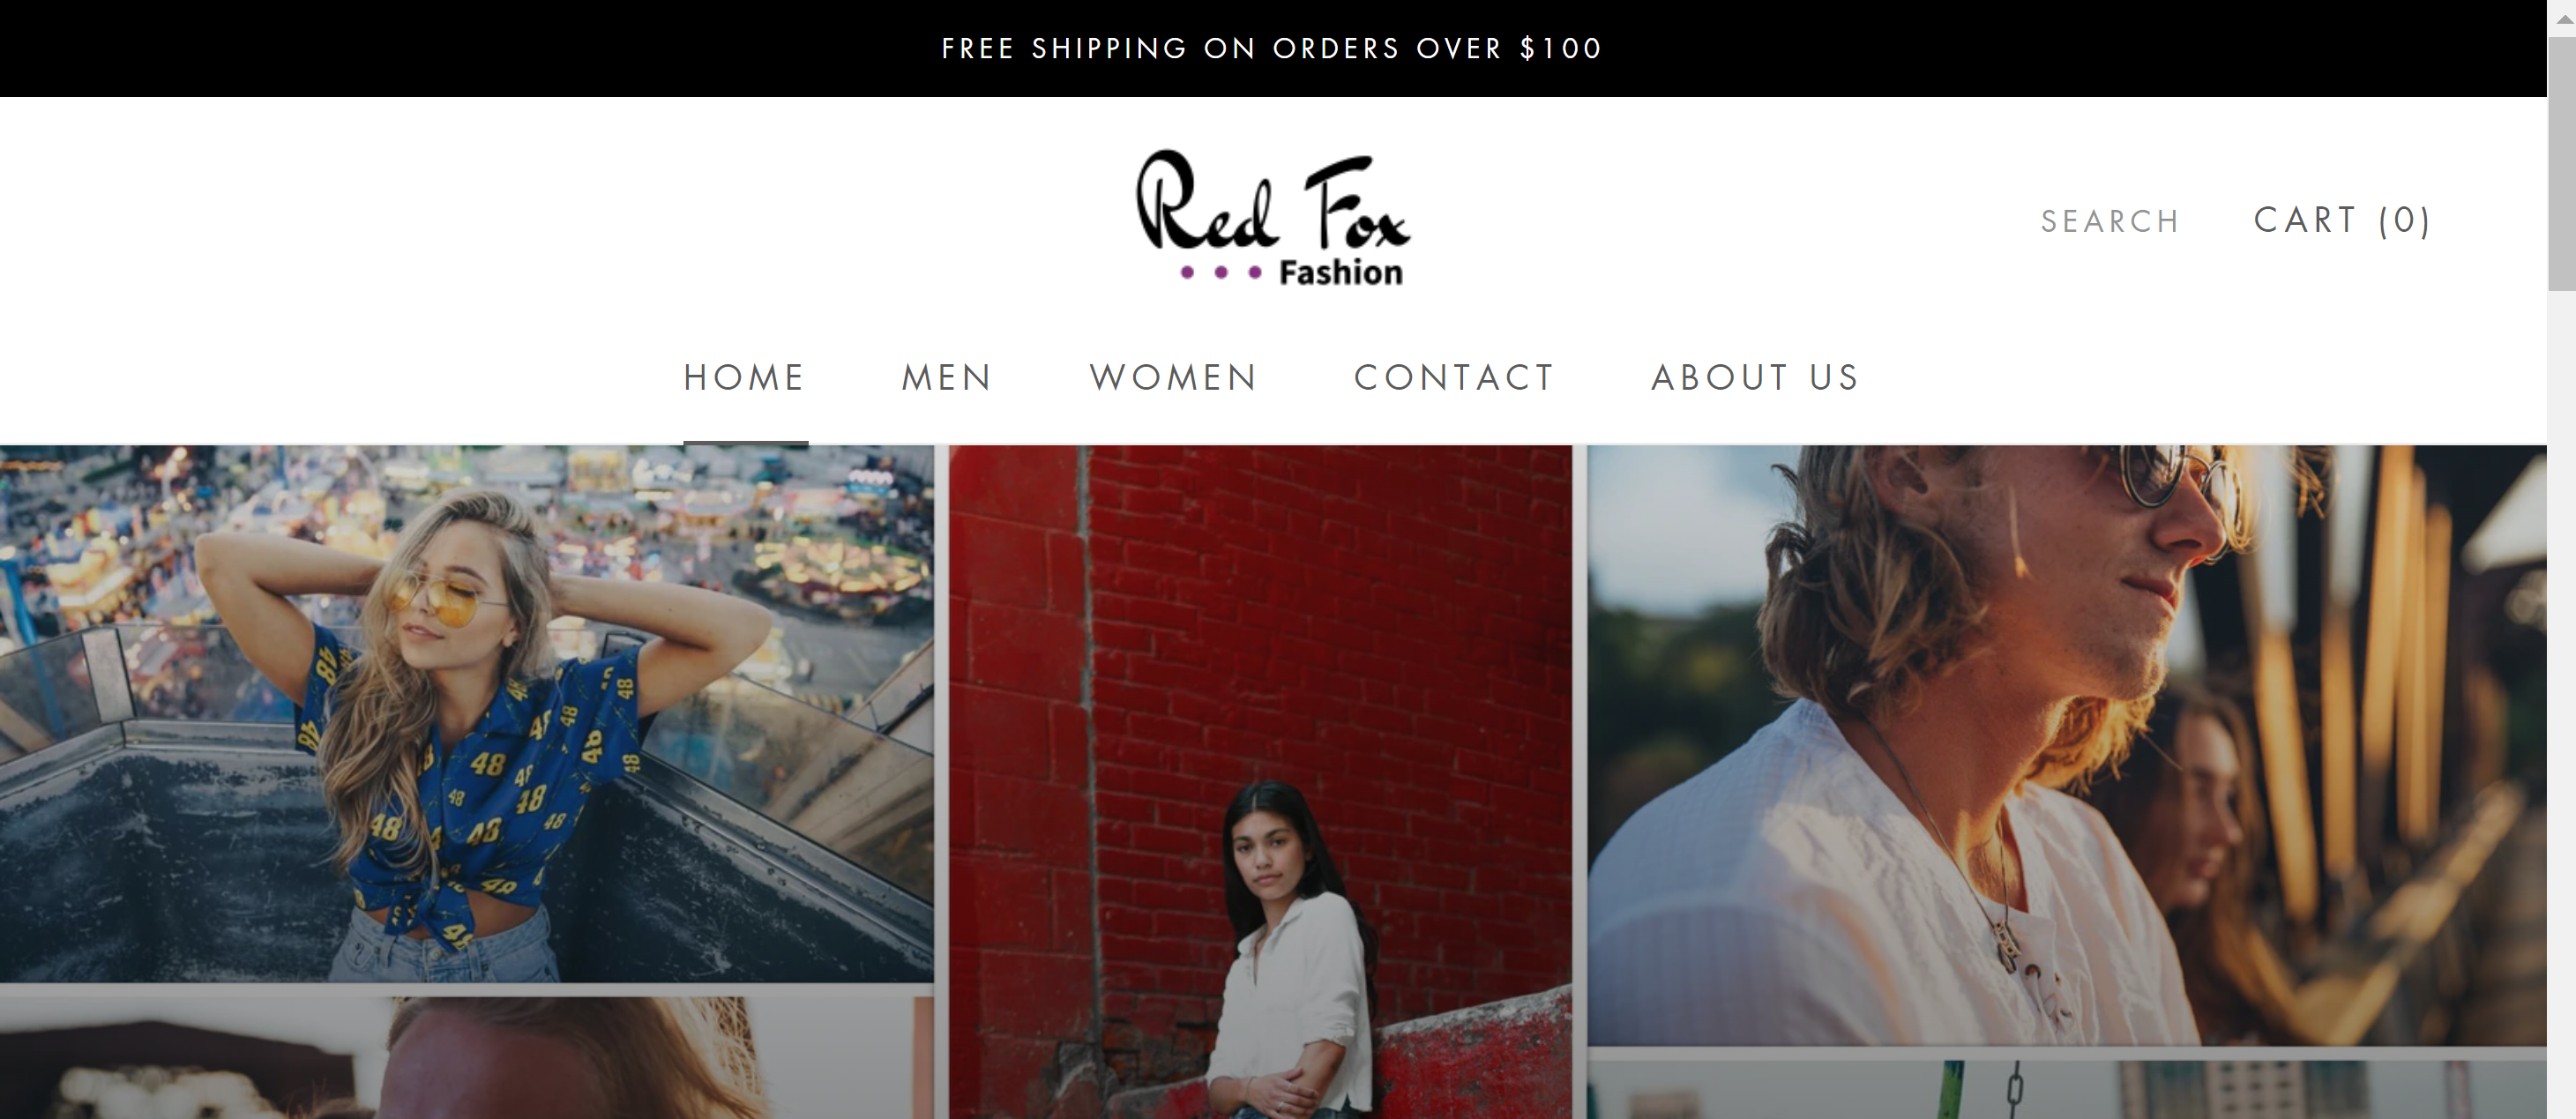 A screenshot of the home page for Red Fox Fashion.